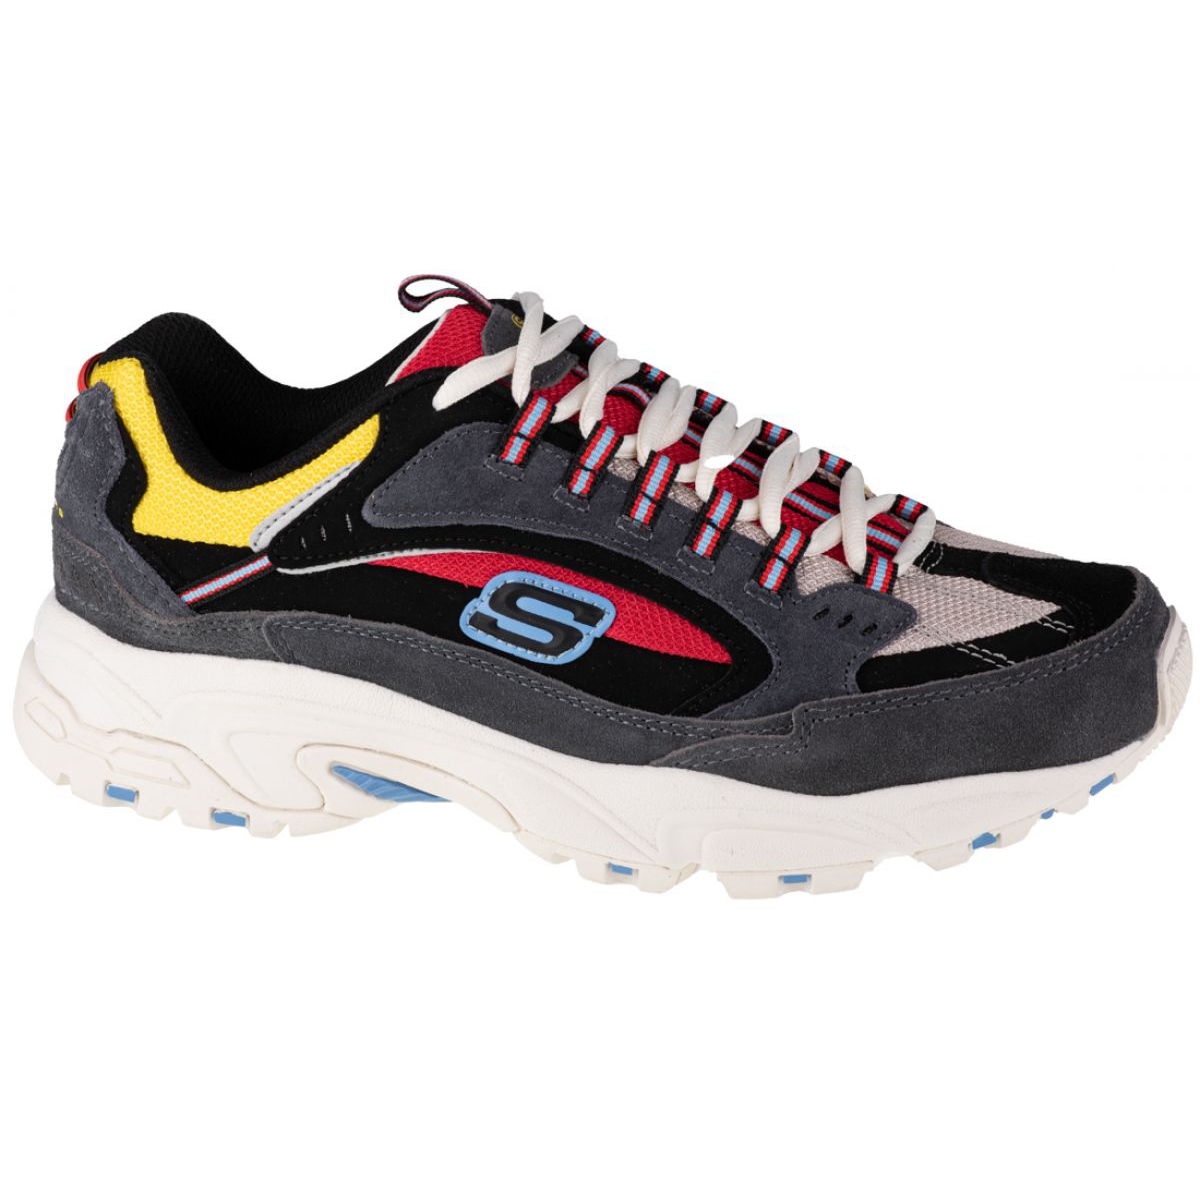 peregrination Næb Anklage Skechers Stamina-Cutback M 51286-CCRD black multicolored - KeeShoes